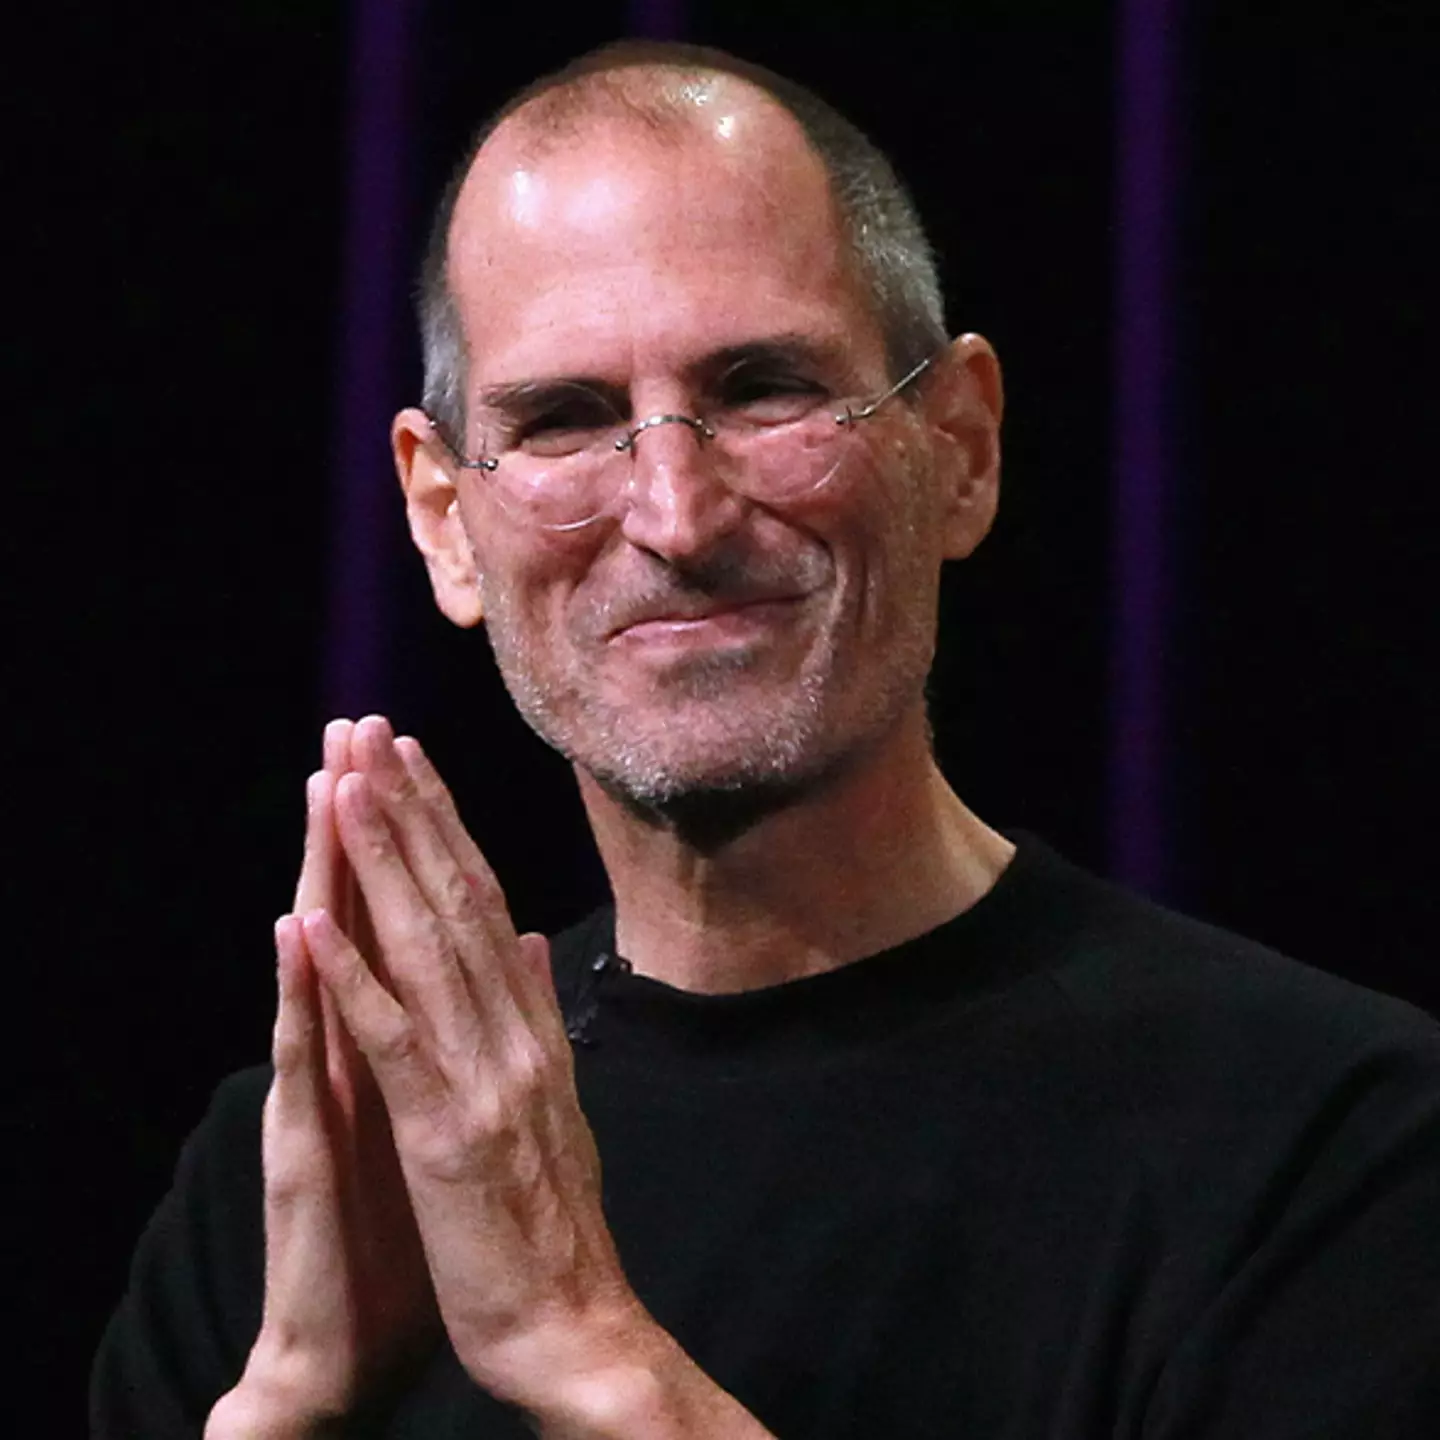 Steve Jobs had a clever 'beer test' he would use for interviewing people at Apple